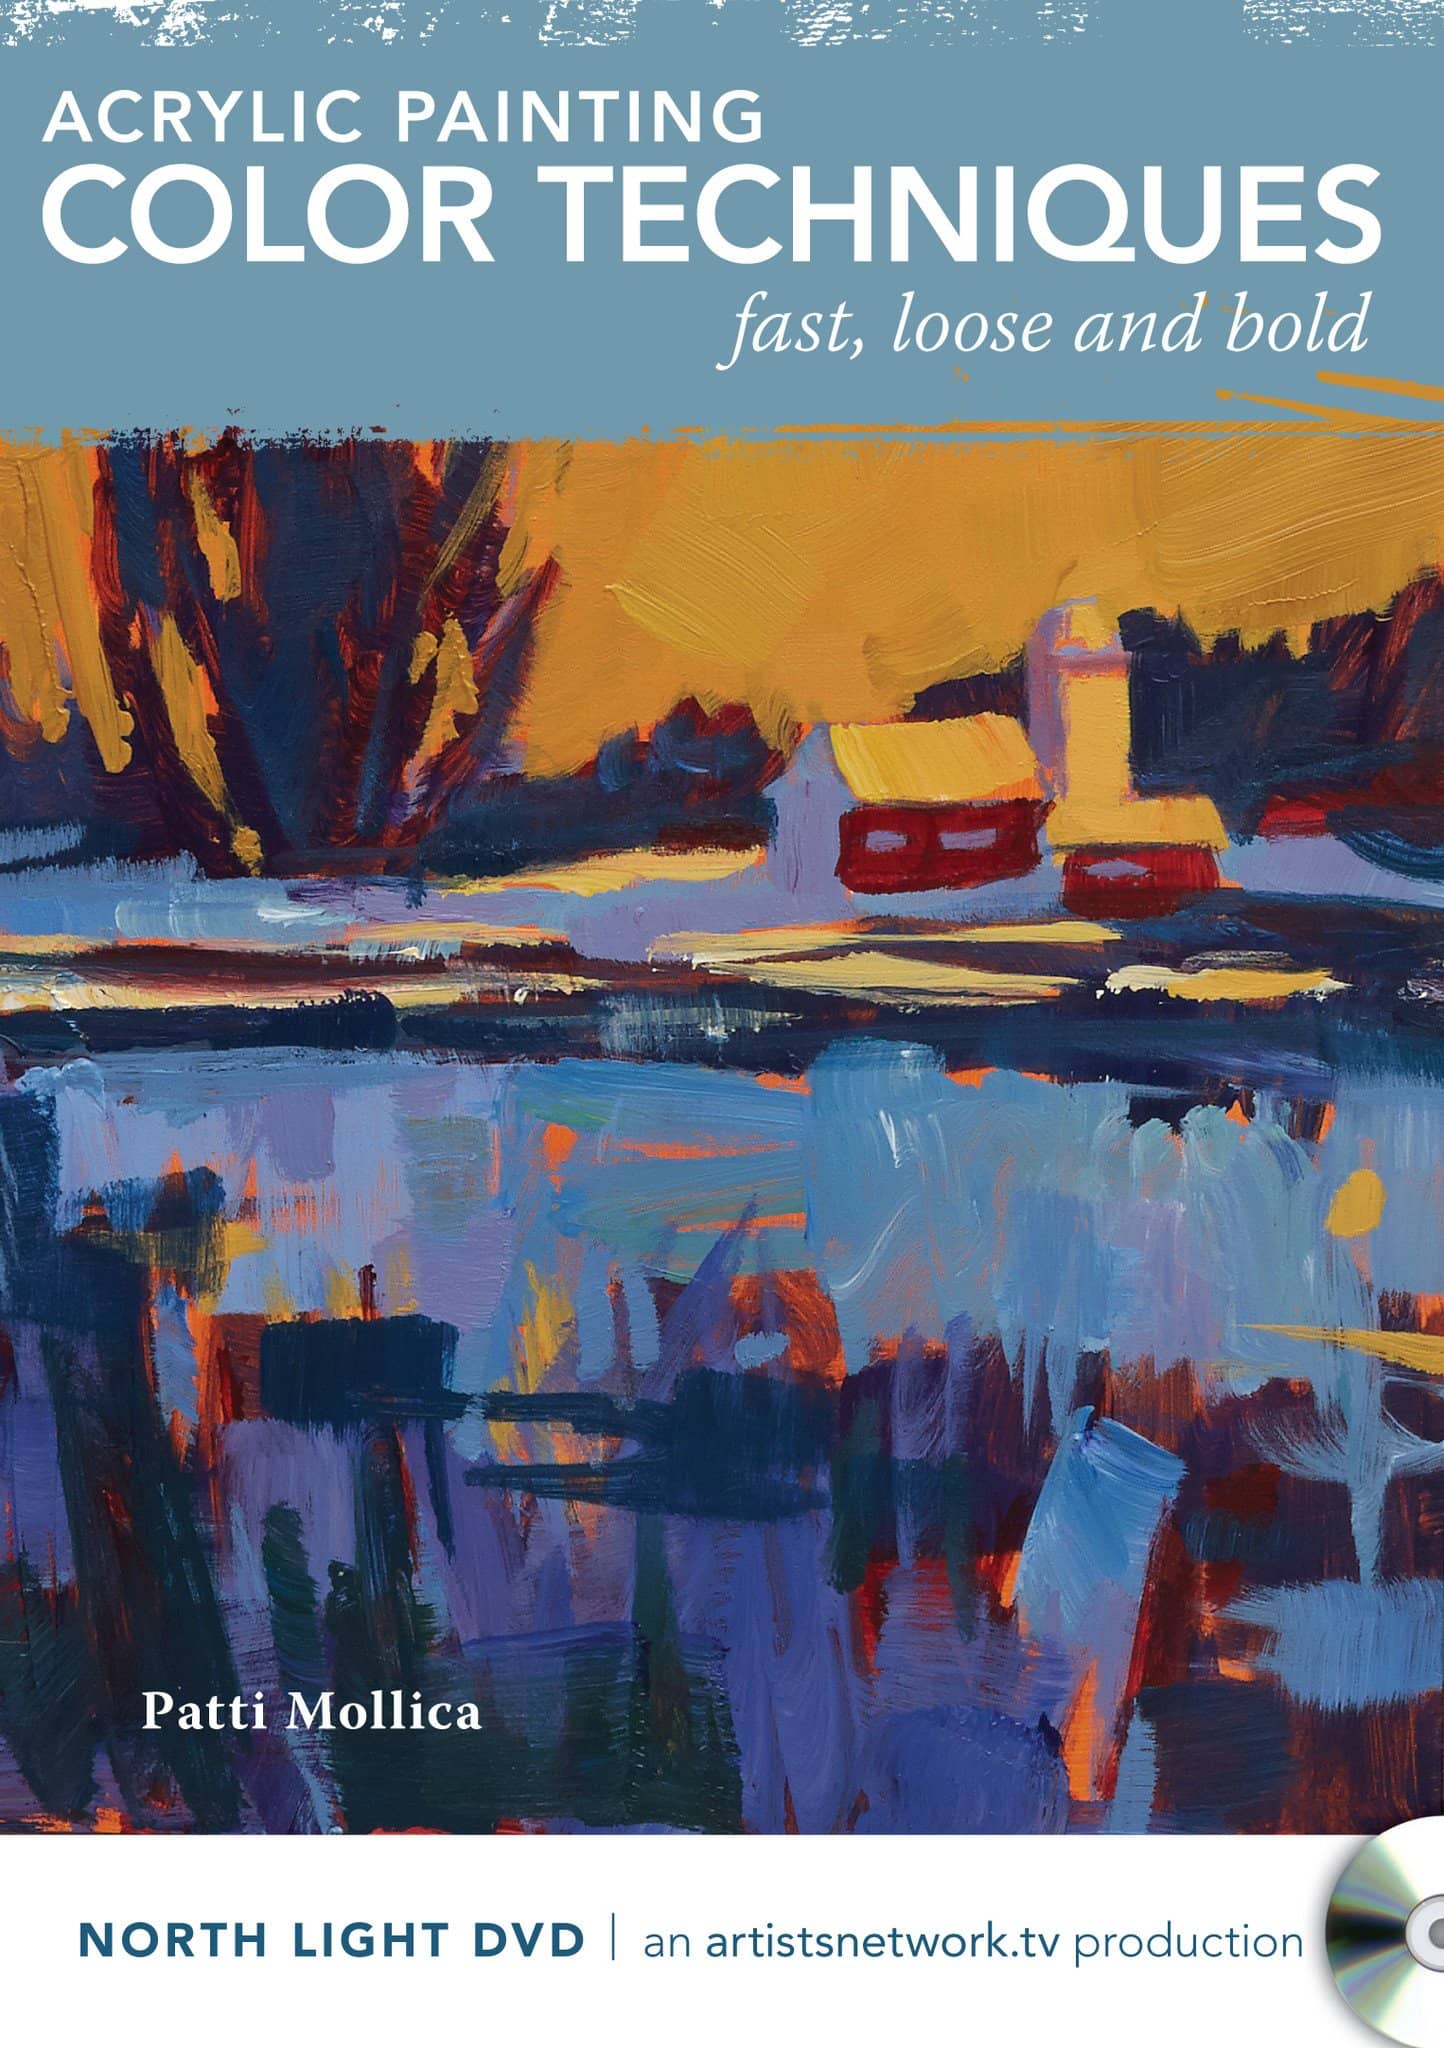 Patti Mollica: Acrylic Painting Color Techniques Fast Loose and Bold